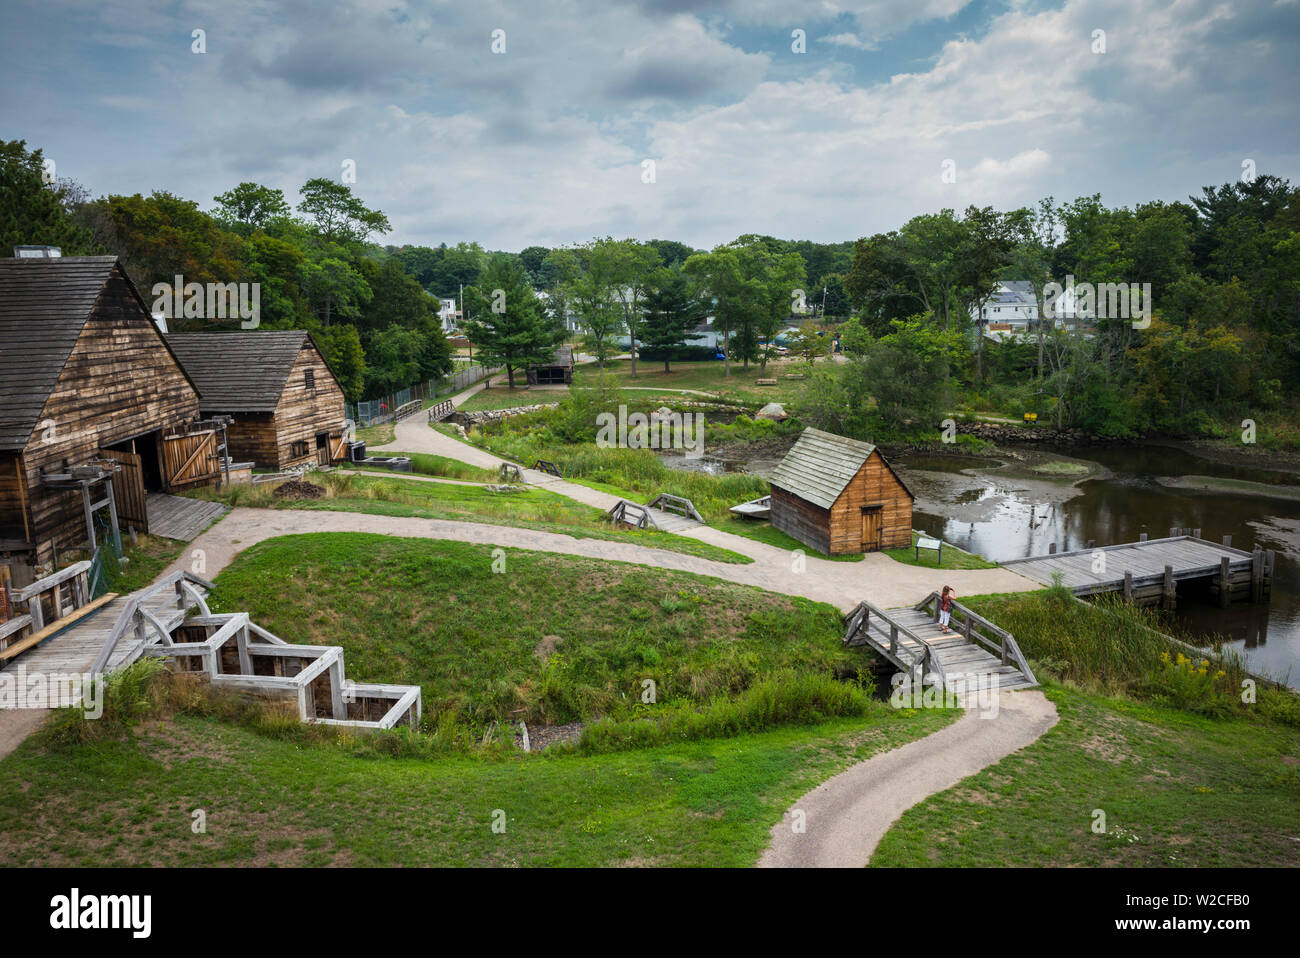 USA, Massachusetts, Saugus, Saugus Iron Works National Historic Park, historic first Iron Forge in the US, elevated view Stock Photo